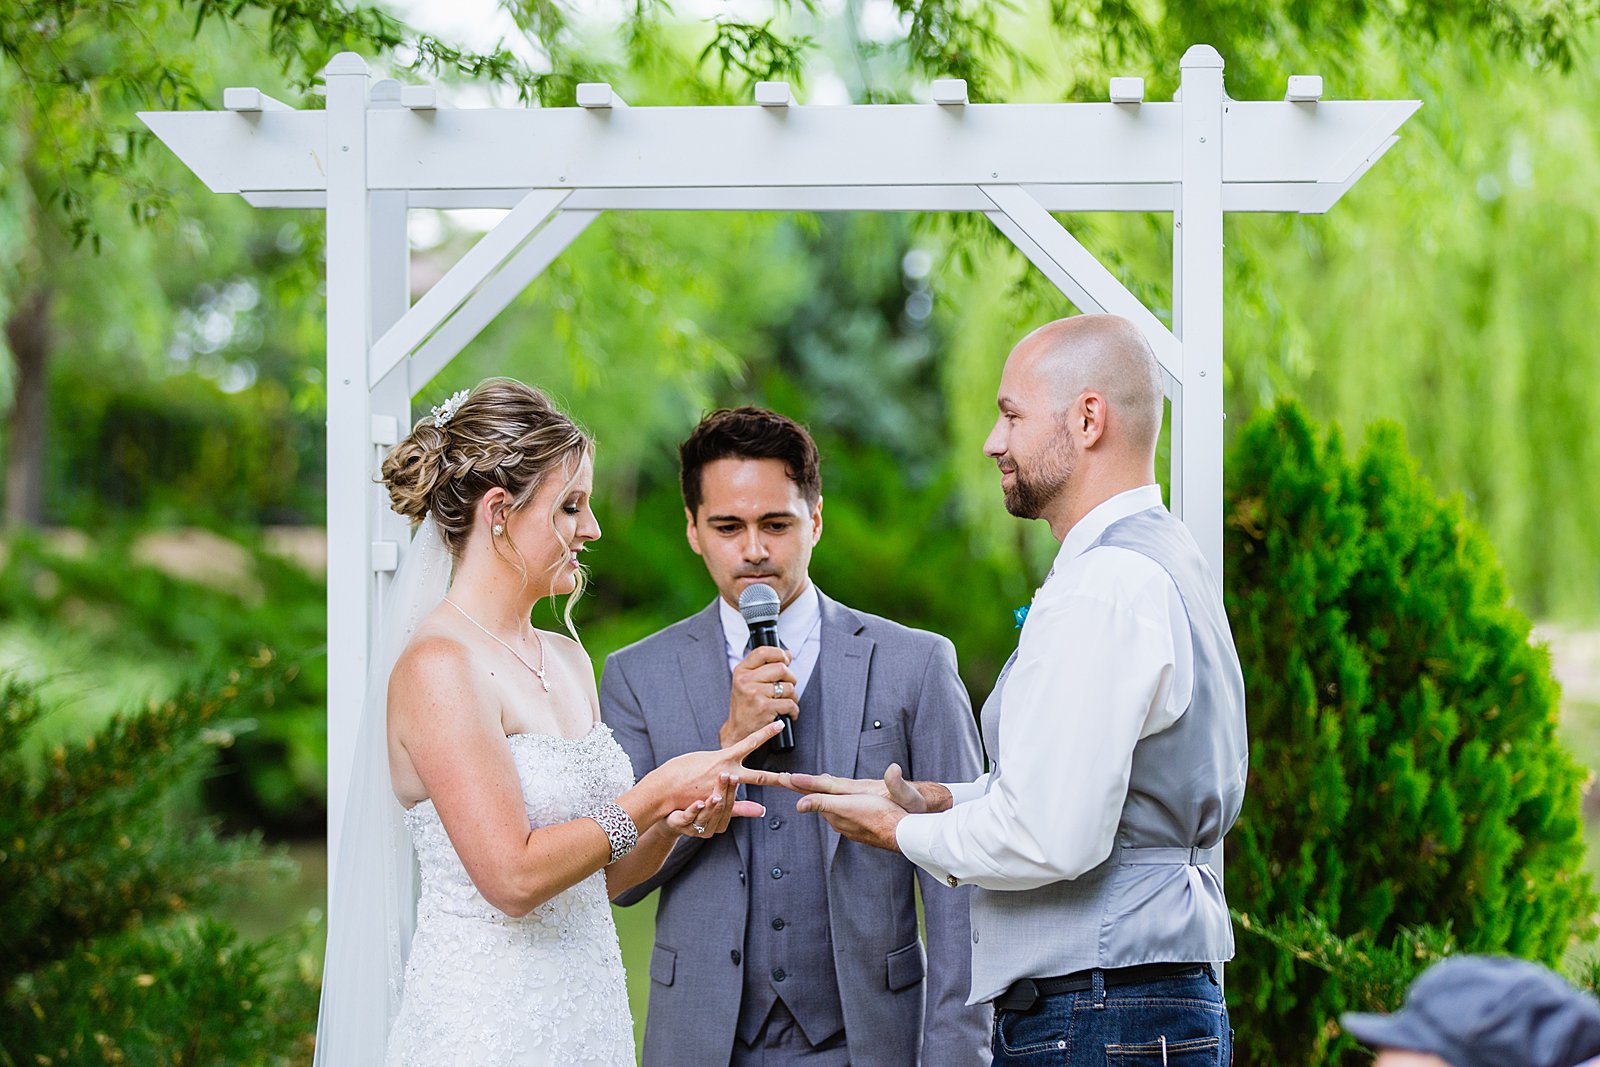 Bride and Groom playing rock paper scissors during their wedding ceremony by Phoenix wedding photographers PMA Photography.